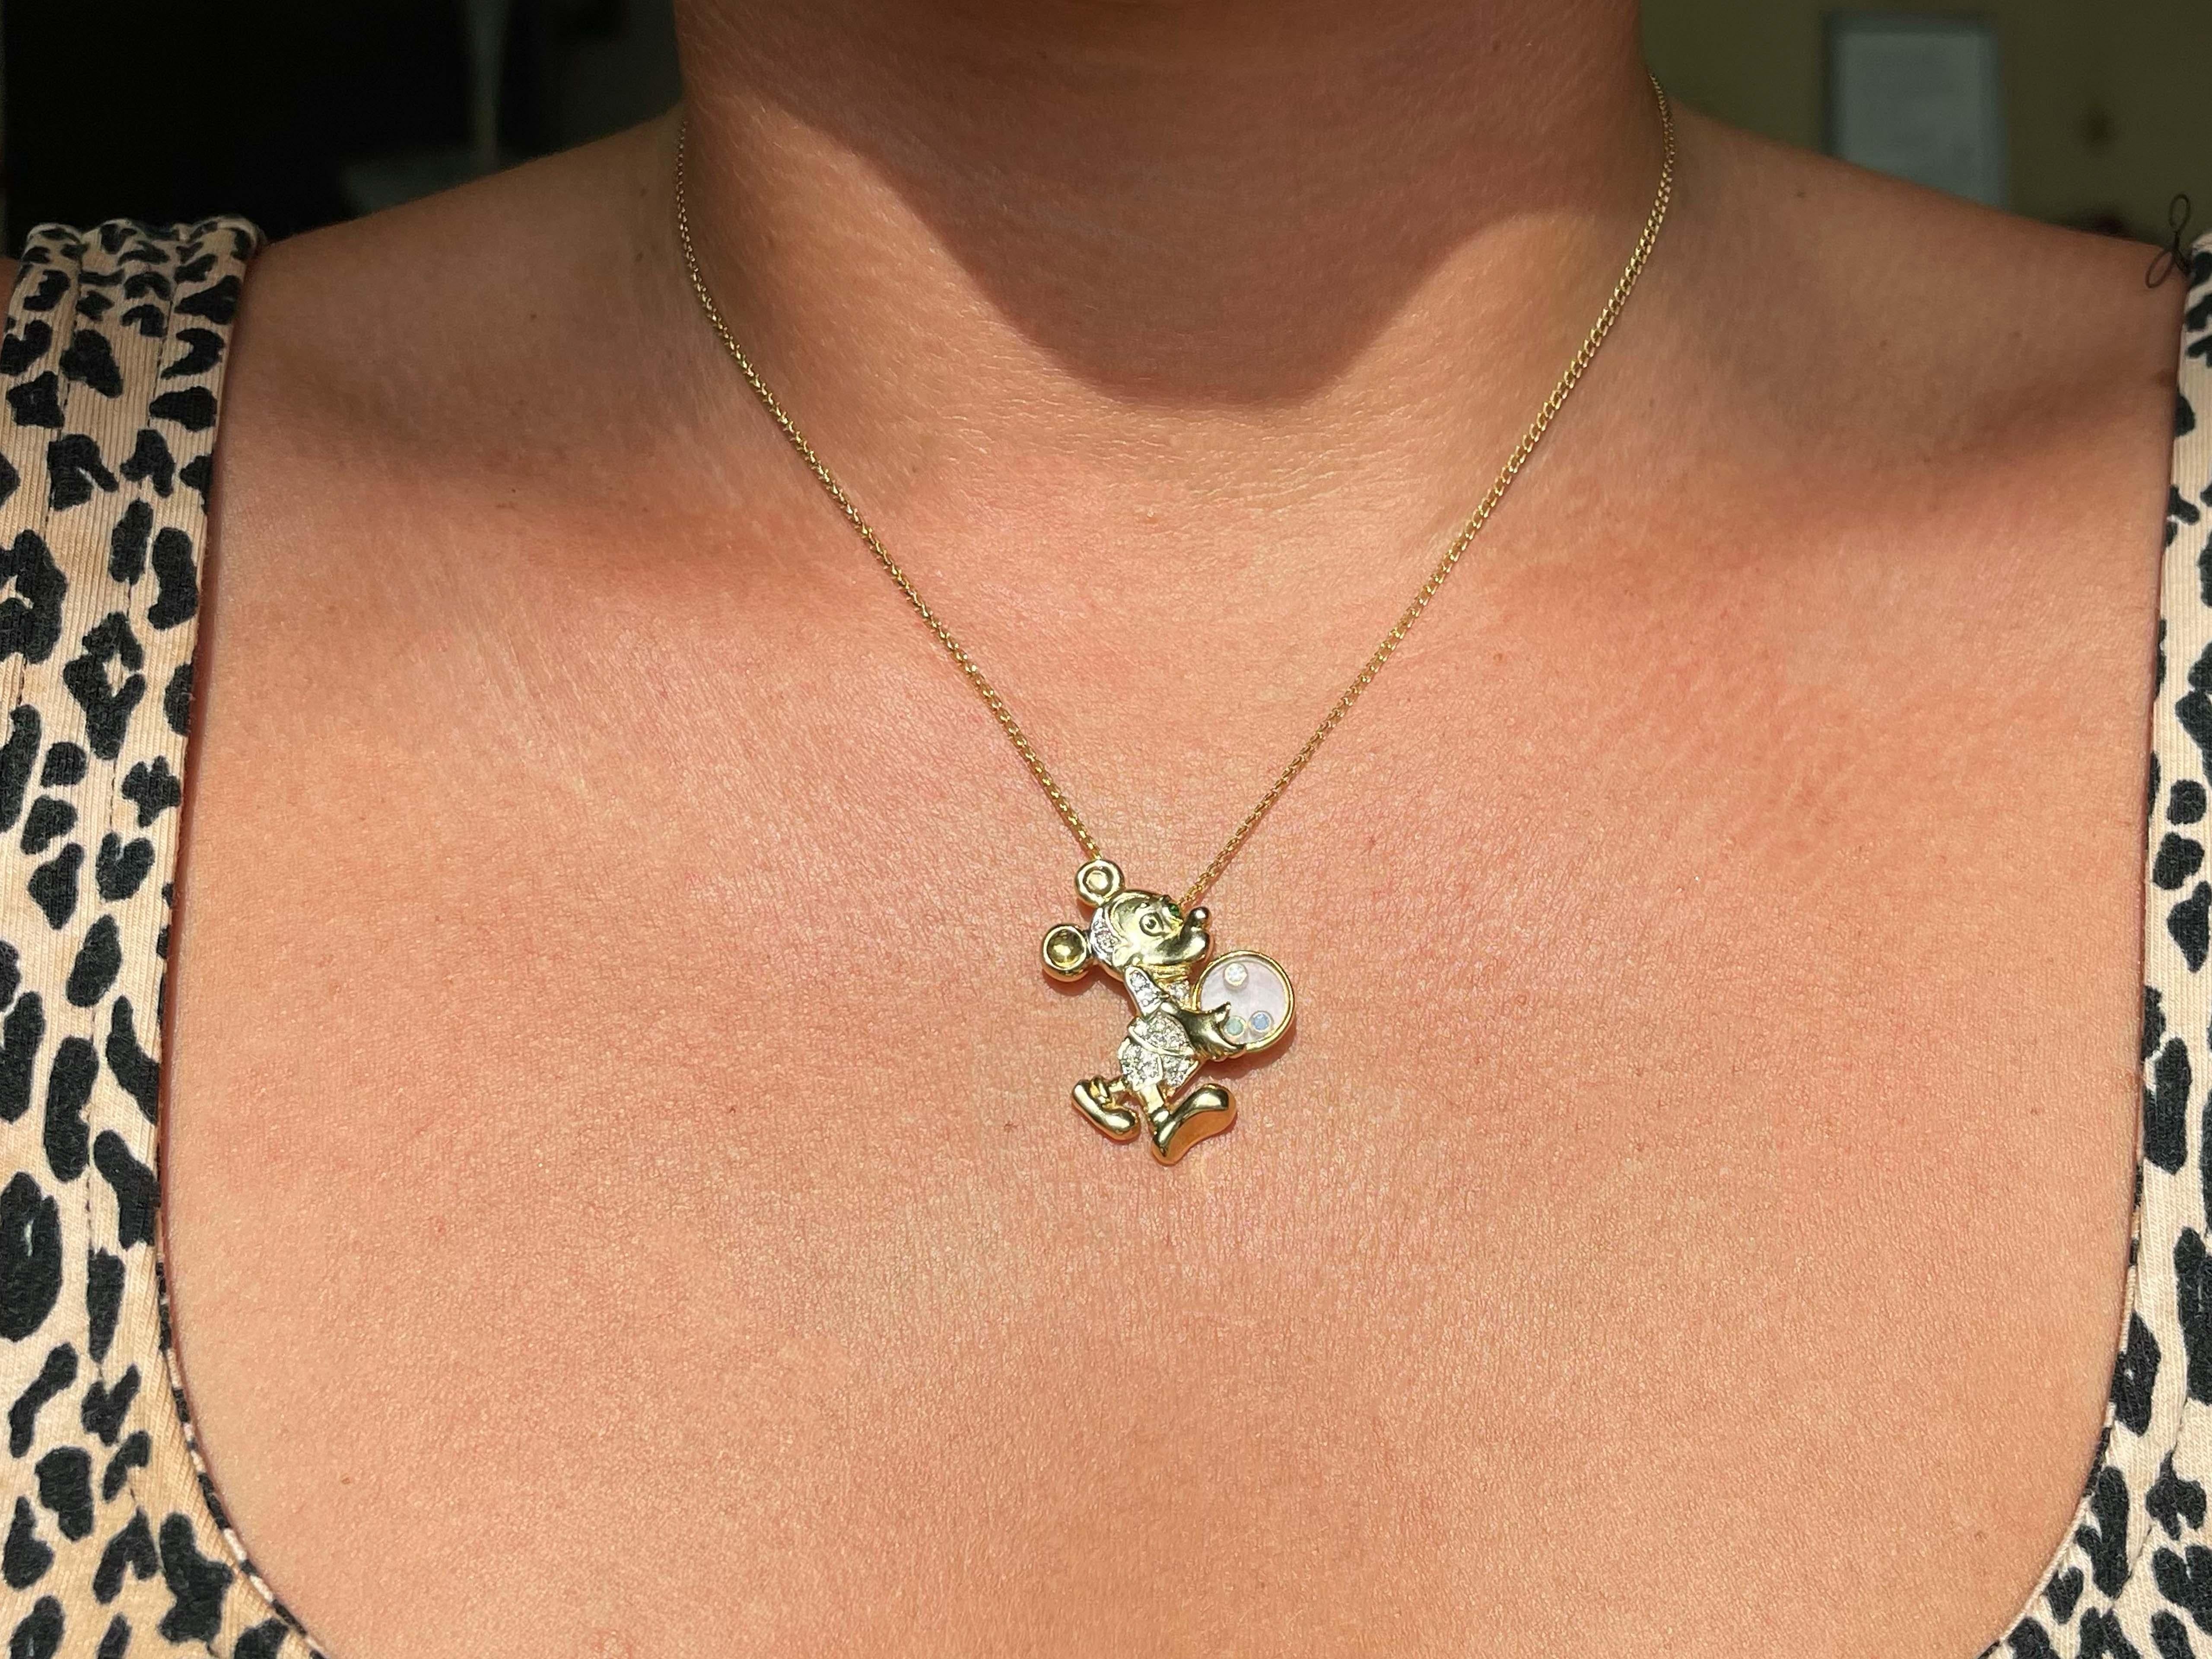 Item Specifications:

Necklace Metal: 18k Yellow Gold

Total Weight: 12.7 Grams

Chain Length: 18